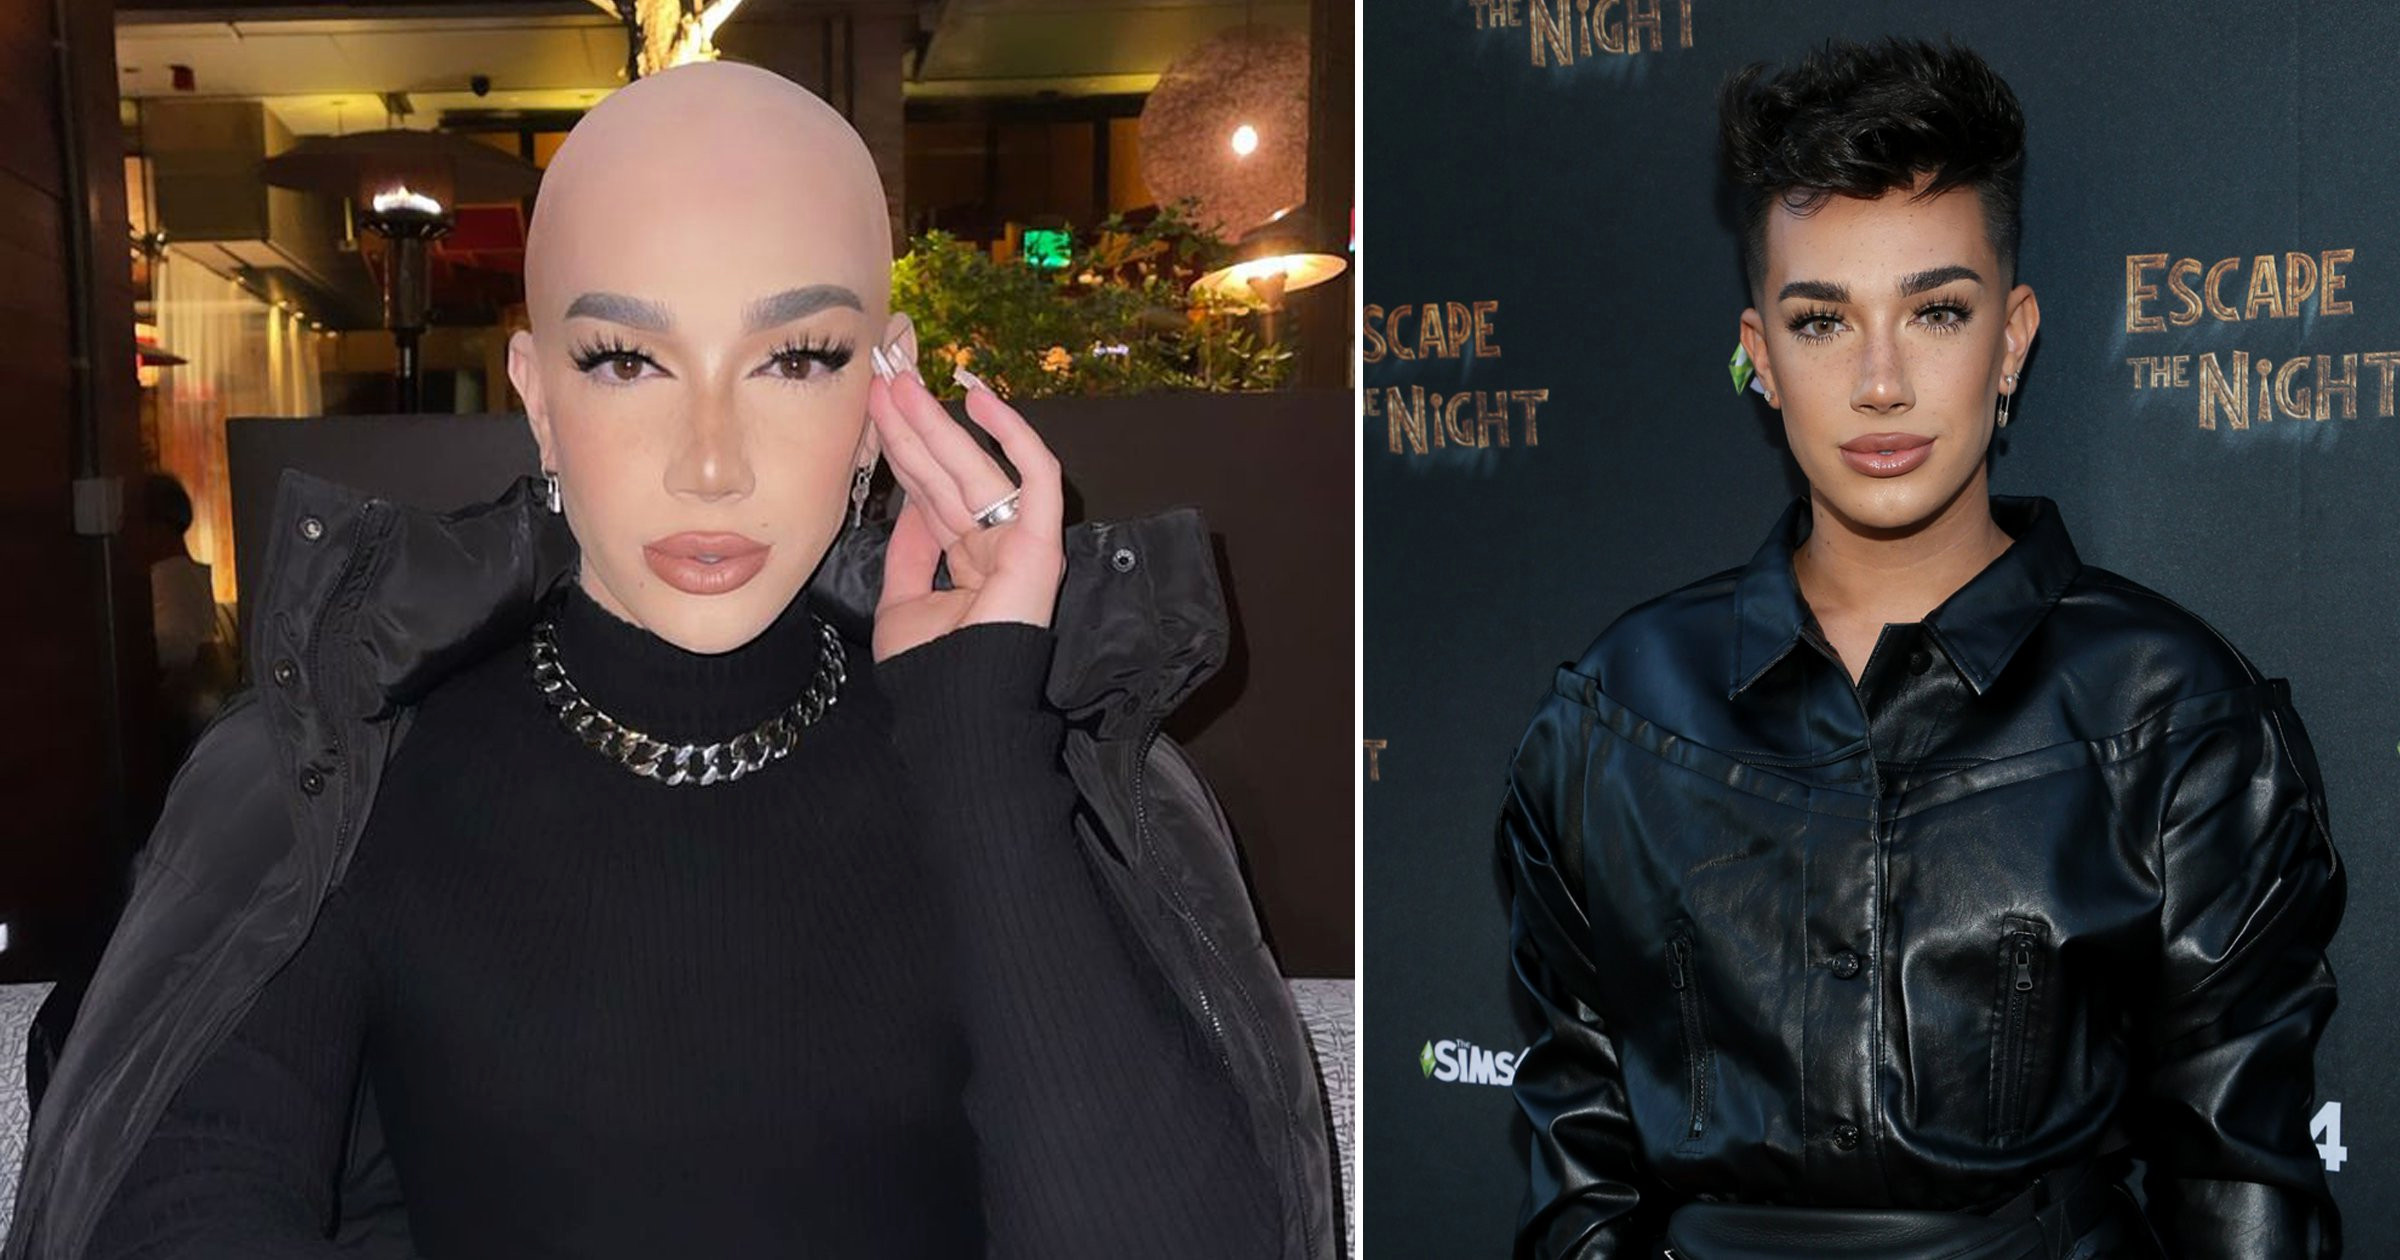 James Charles fans compare shaved head to Jeff Bezos and Voldemort as they suspect it may be bald cap